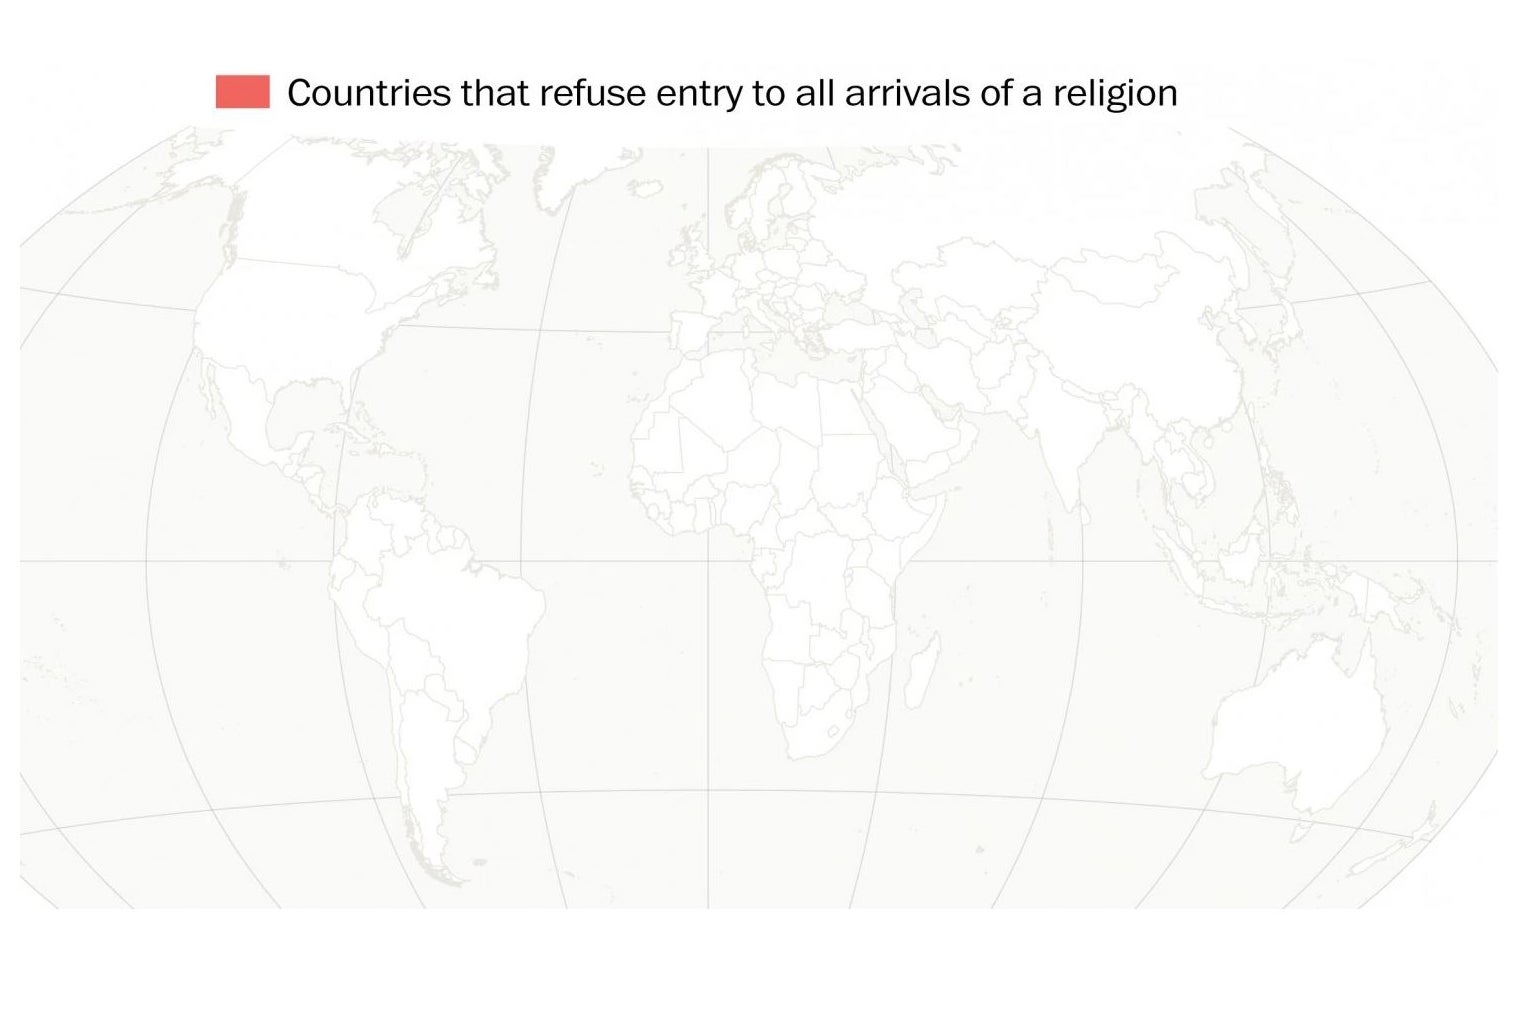 This map shows all the countries that refuse entry based on religion